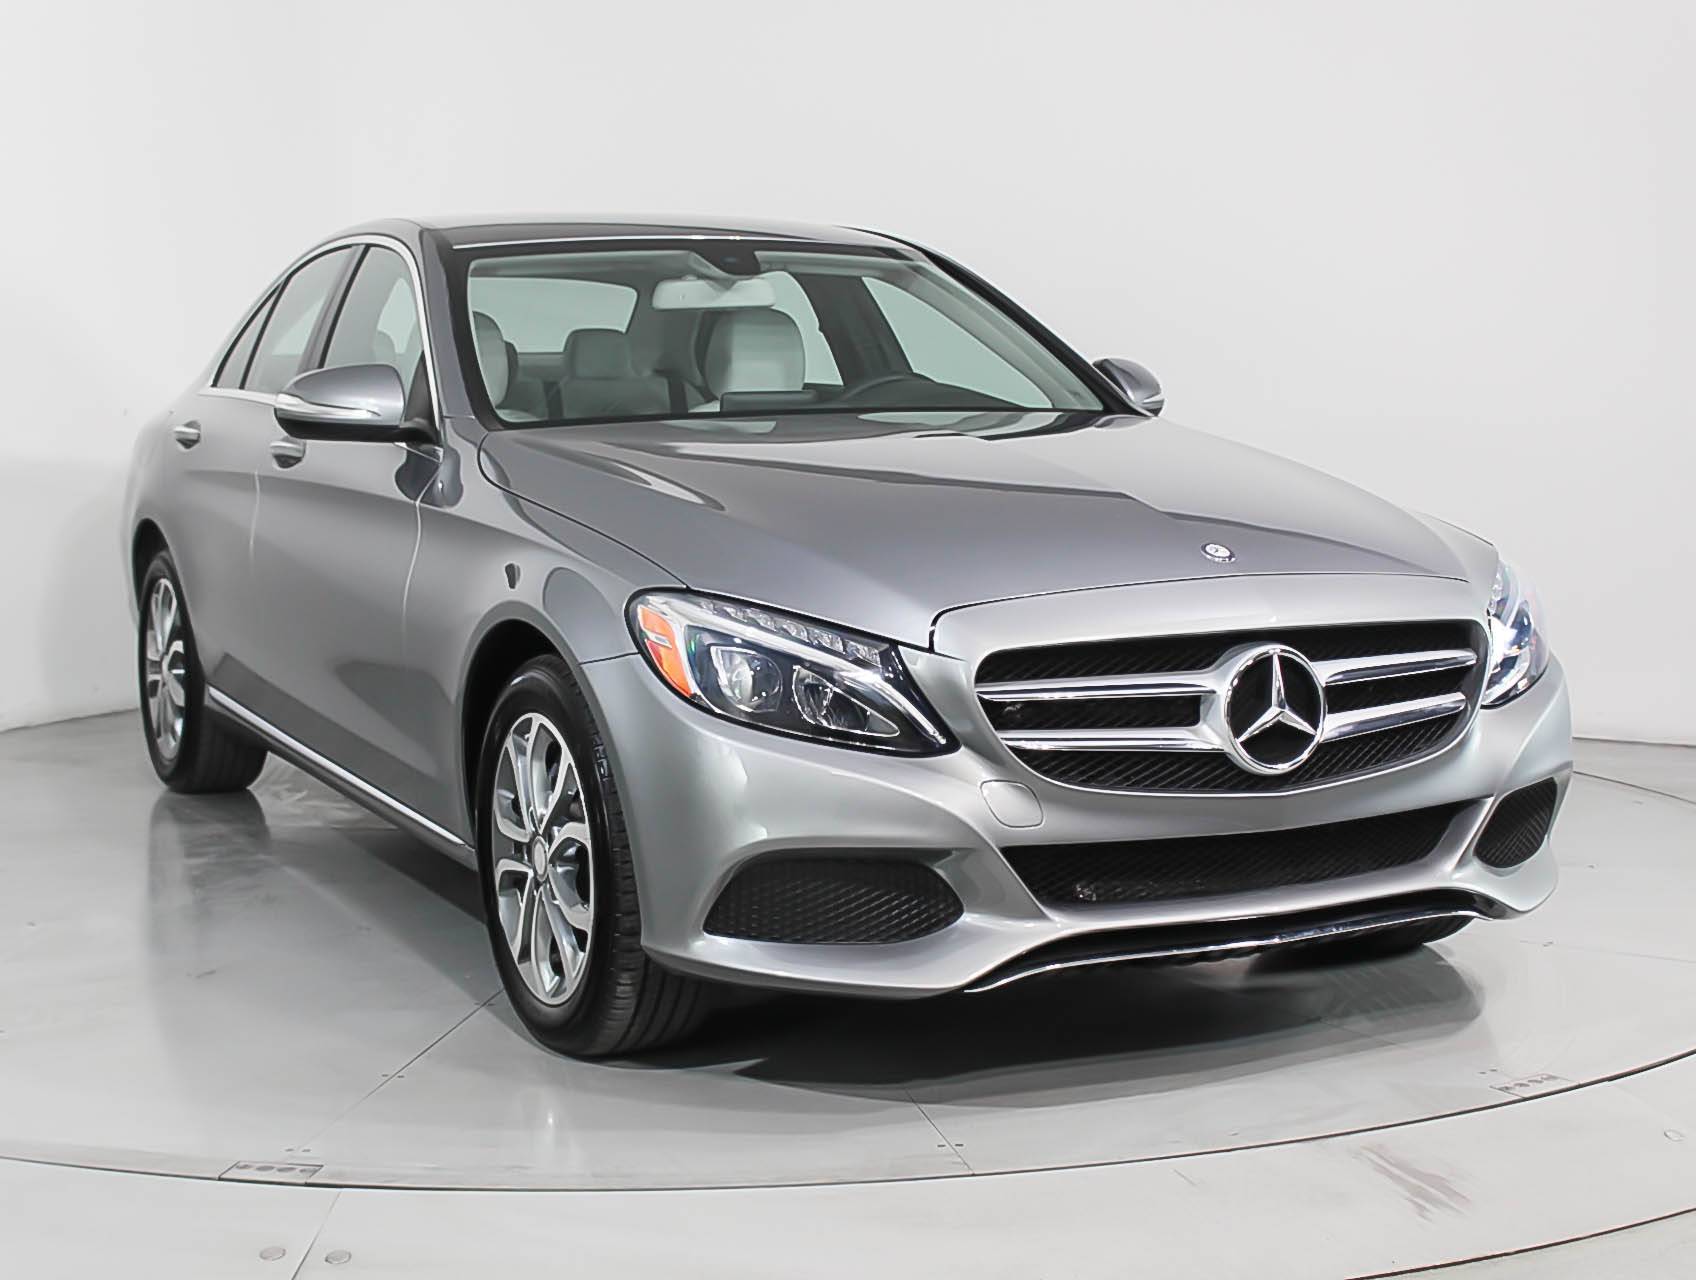 Florida Fine Cars - Used MERCEDES-BENZ C CLASS 2015 HOLLYWOOD C300 4MATIC